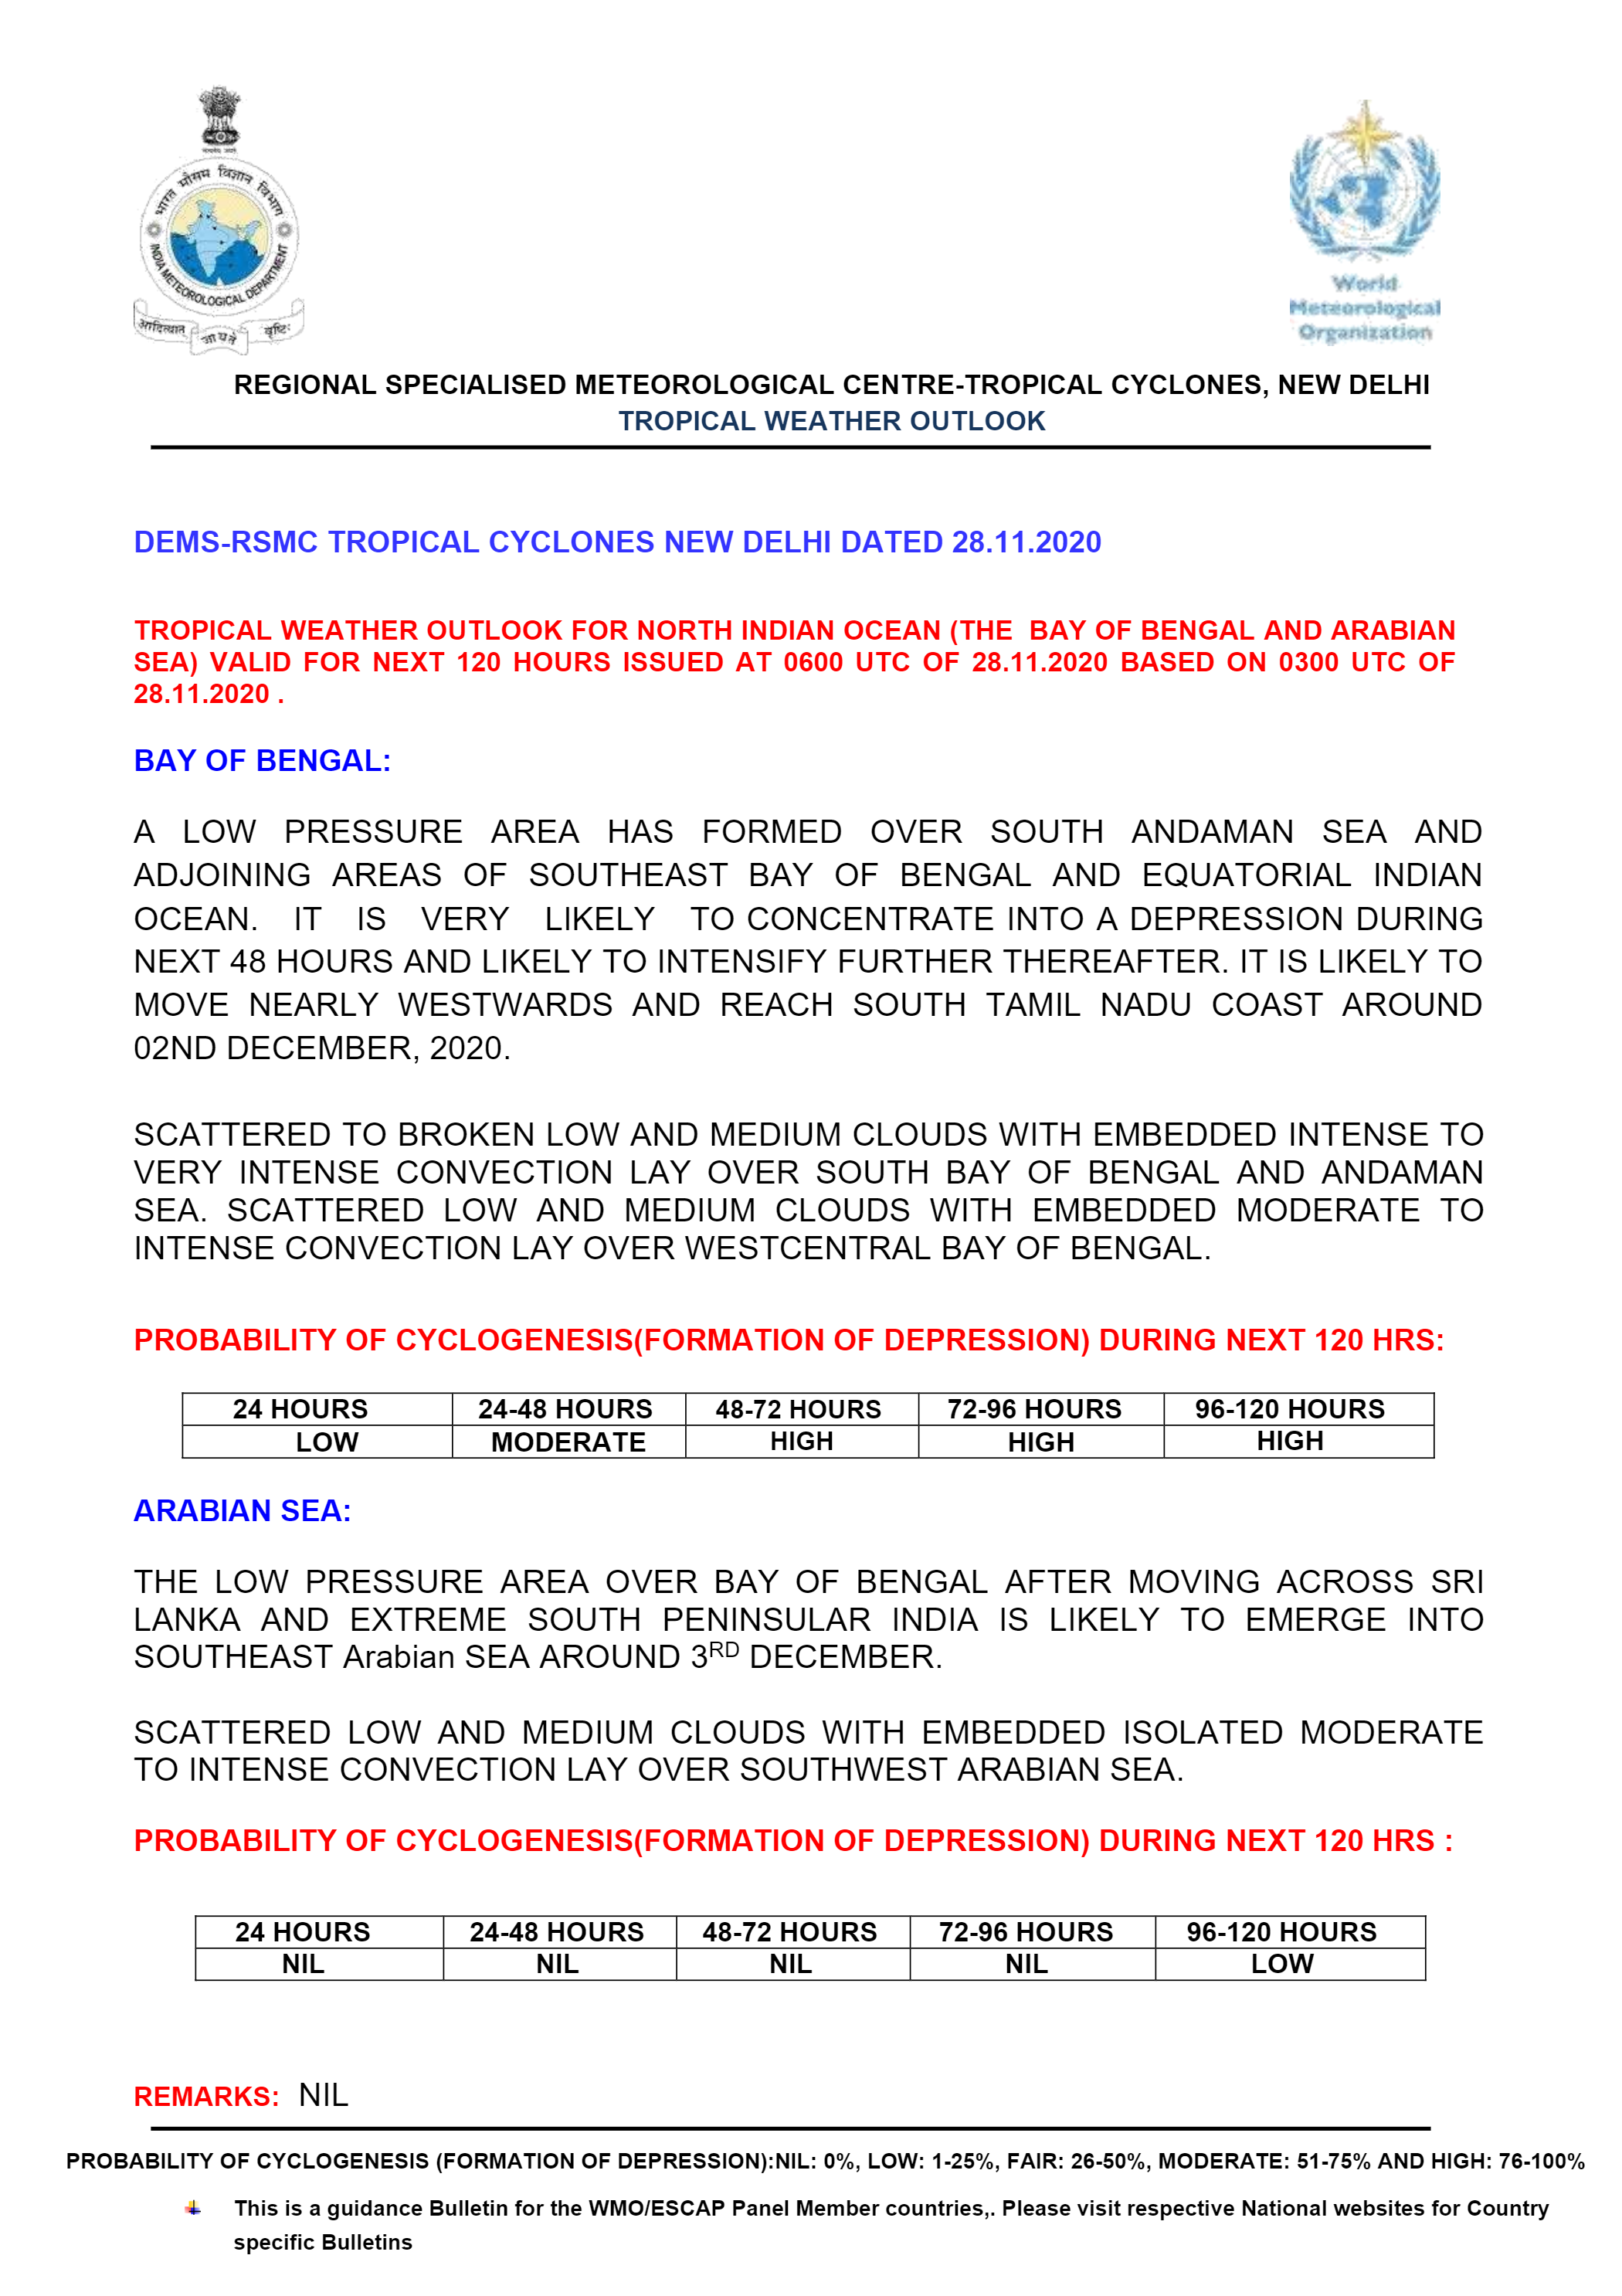 1_Tropical Weather Outlook based on  0300 UTC of 28.11.2020_5fc1fb86a3c5e.png